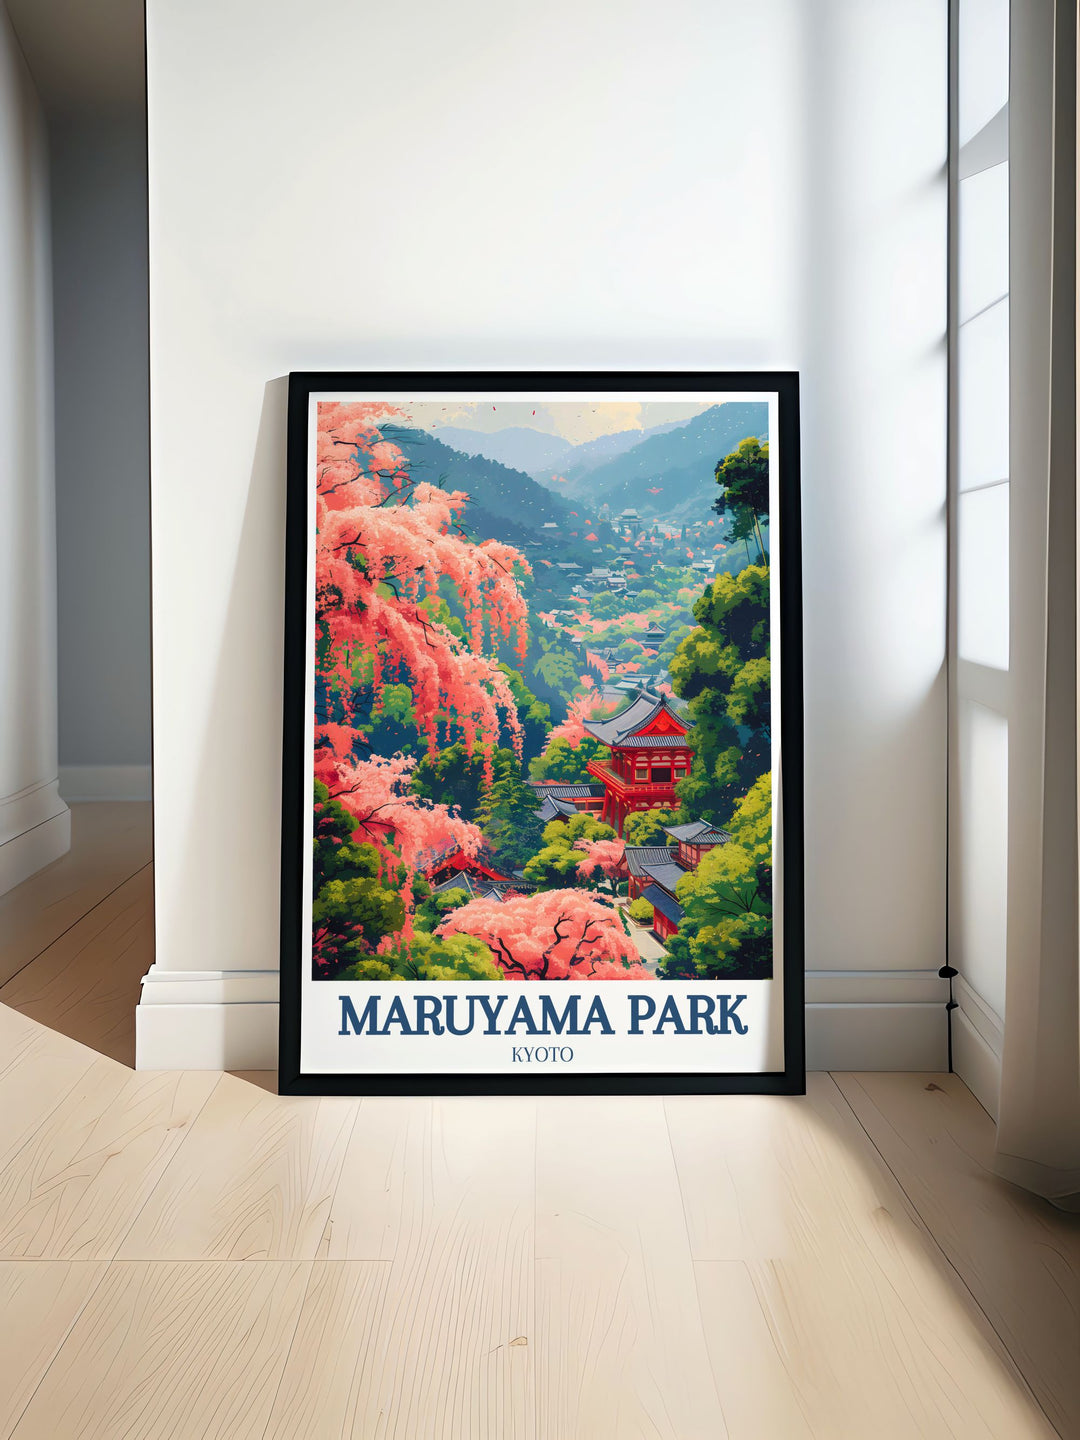 Beautiful Kyoto Yasaka Shrine Shidare Zakura cherry blossom print showcasing the tranquil Japanese garden perfect for adding elegance to your home decor ideal for anyone who loves Japan and appreciates fine art a great travel poster for any living space